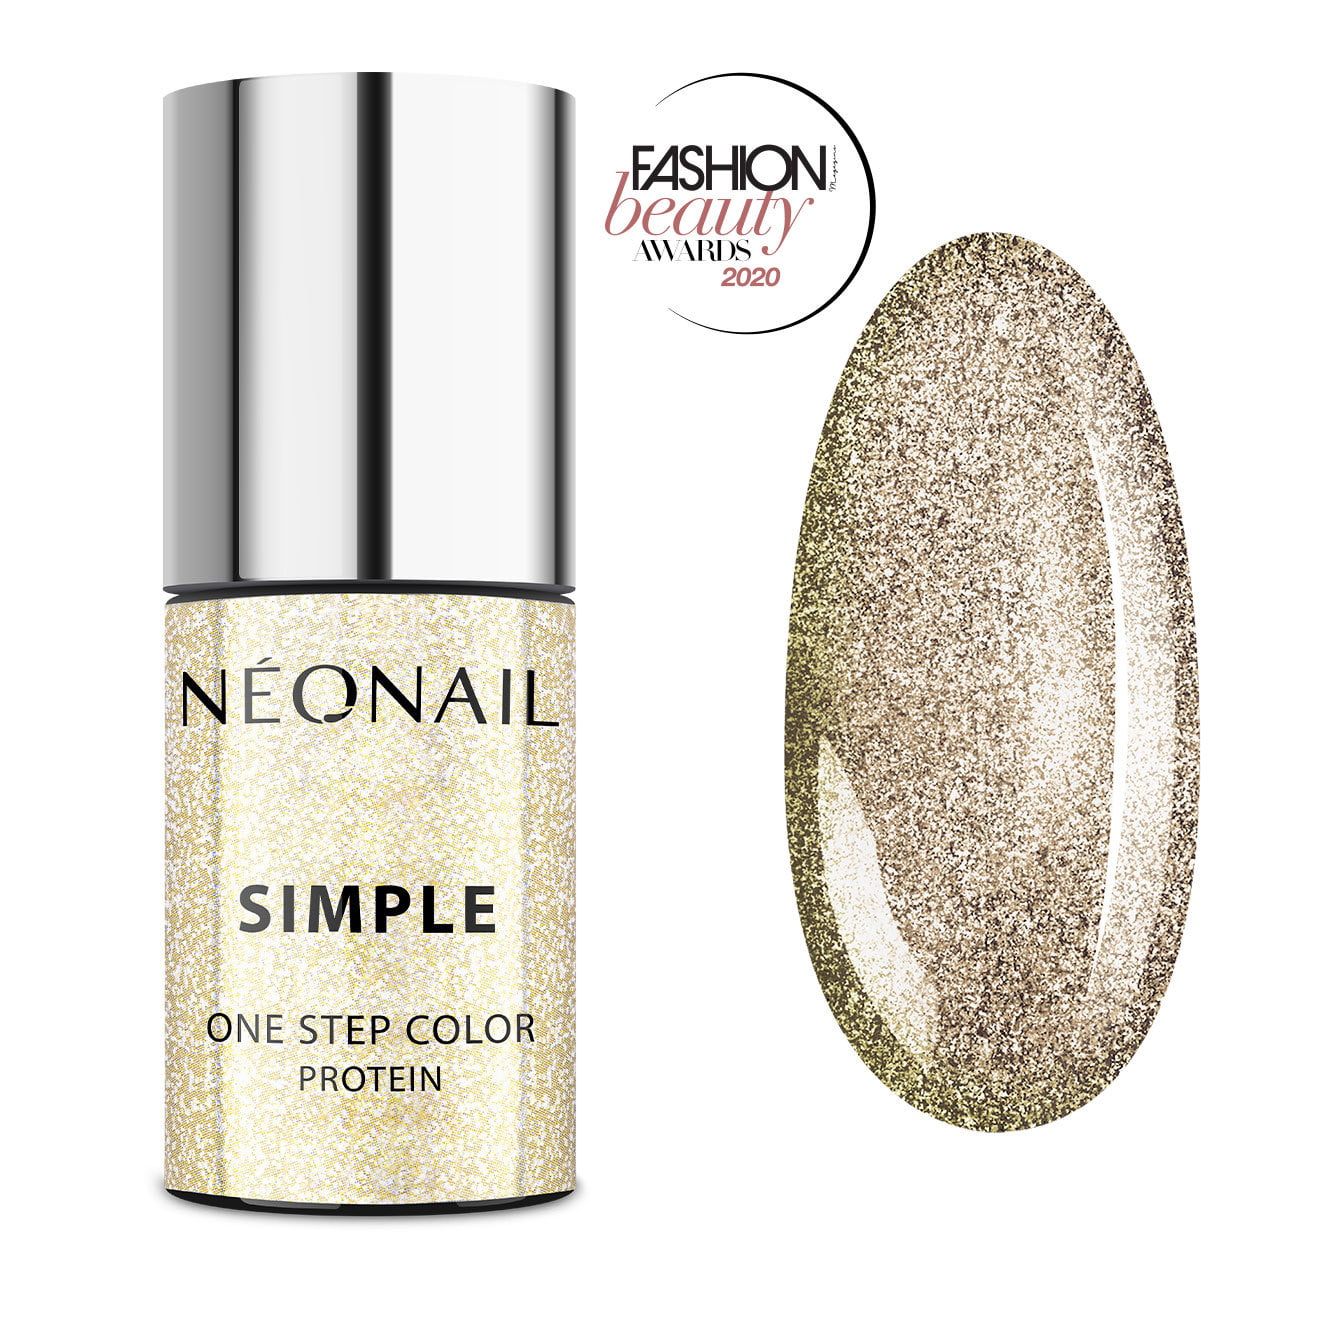 NeoNail Simple One Step Color Protein 7,2ml - BRILLIANT